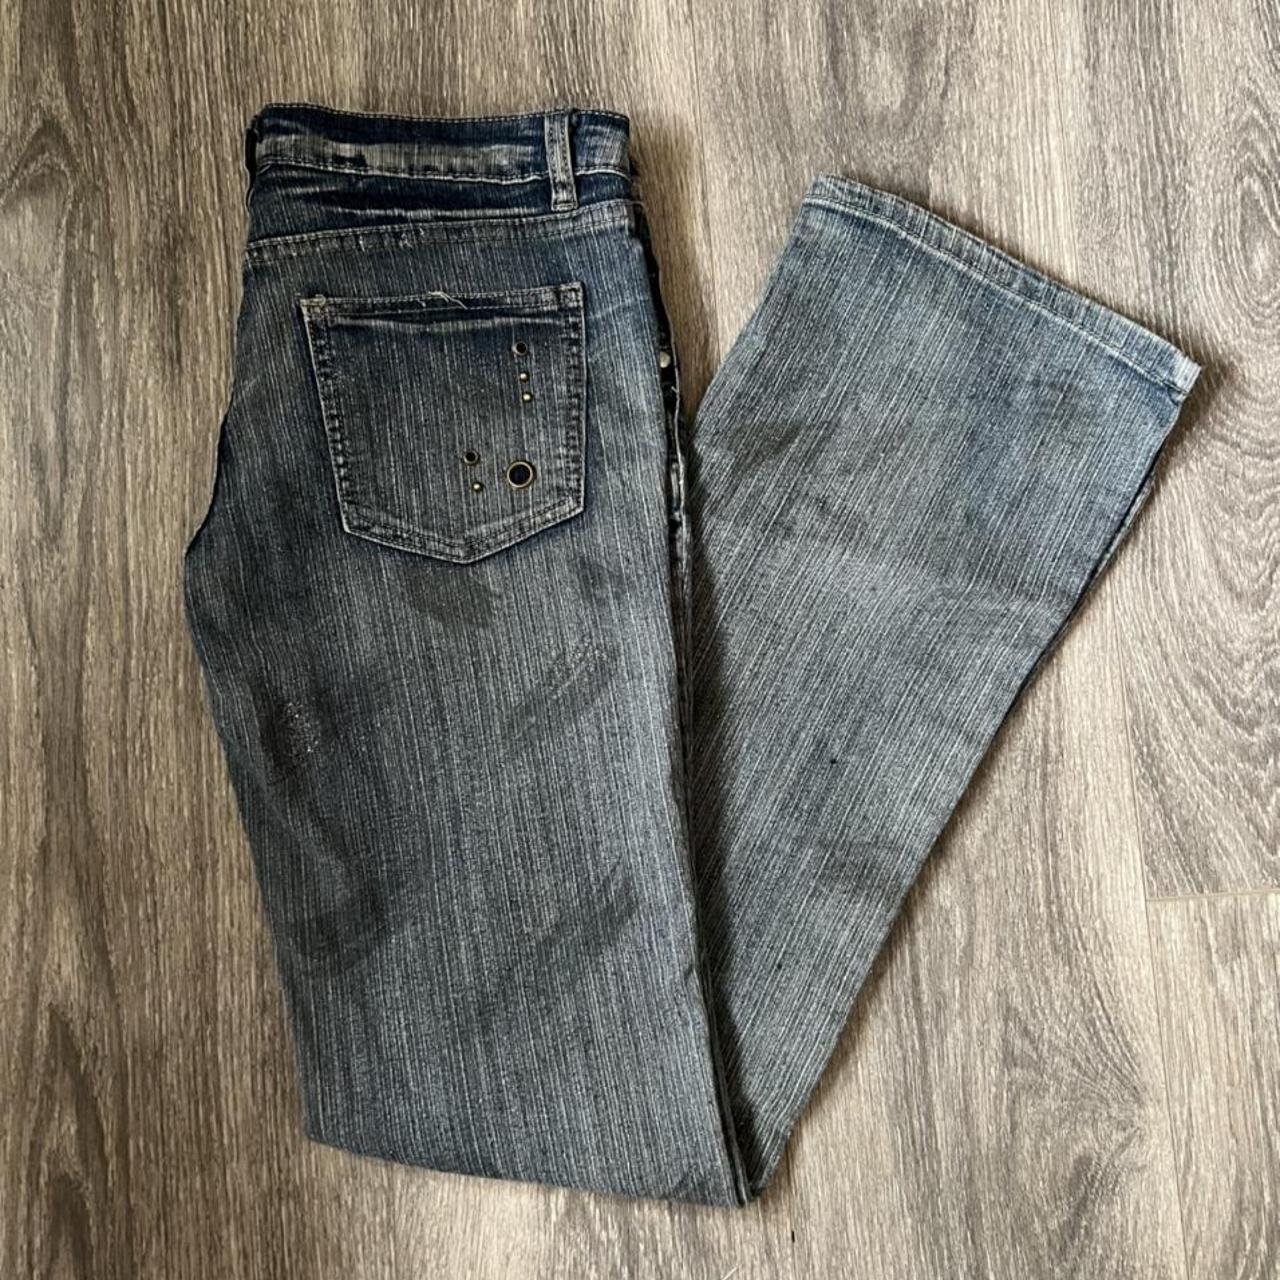 Tag1080 jeans. Absolutely adore these. Honestly give... - Depop